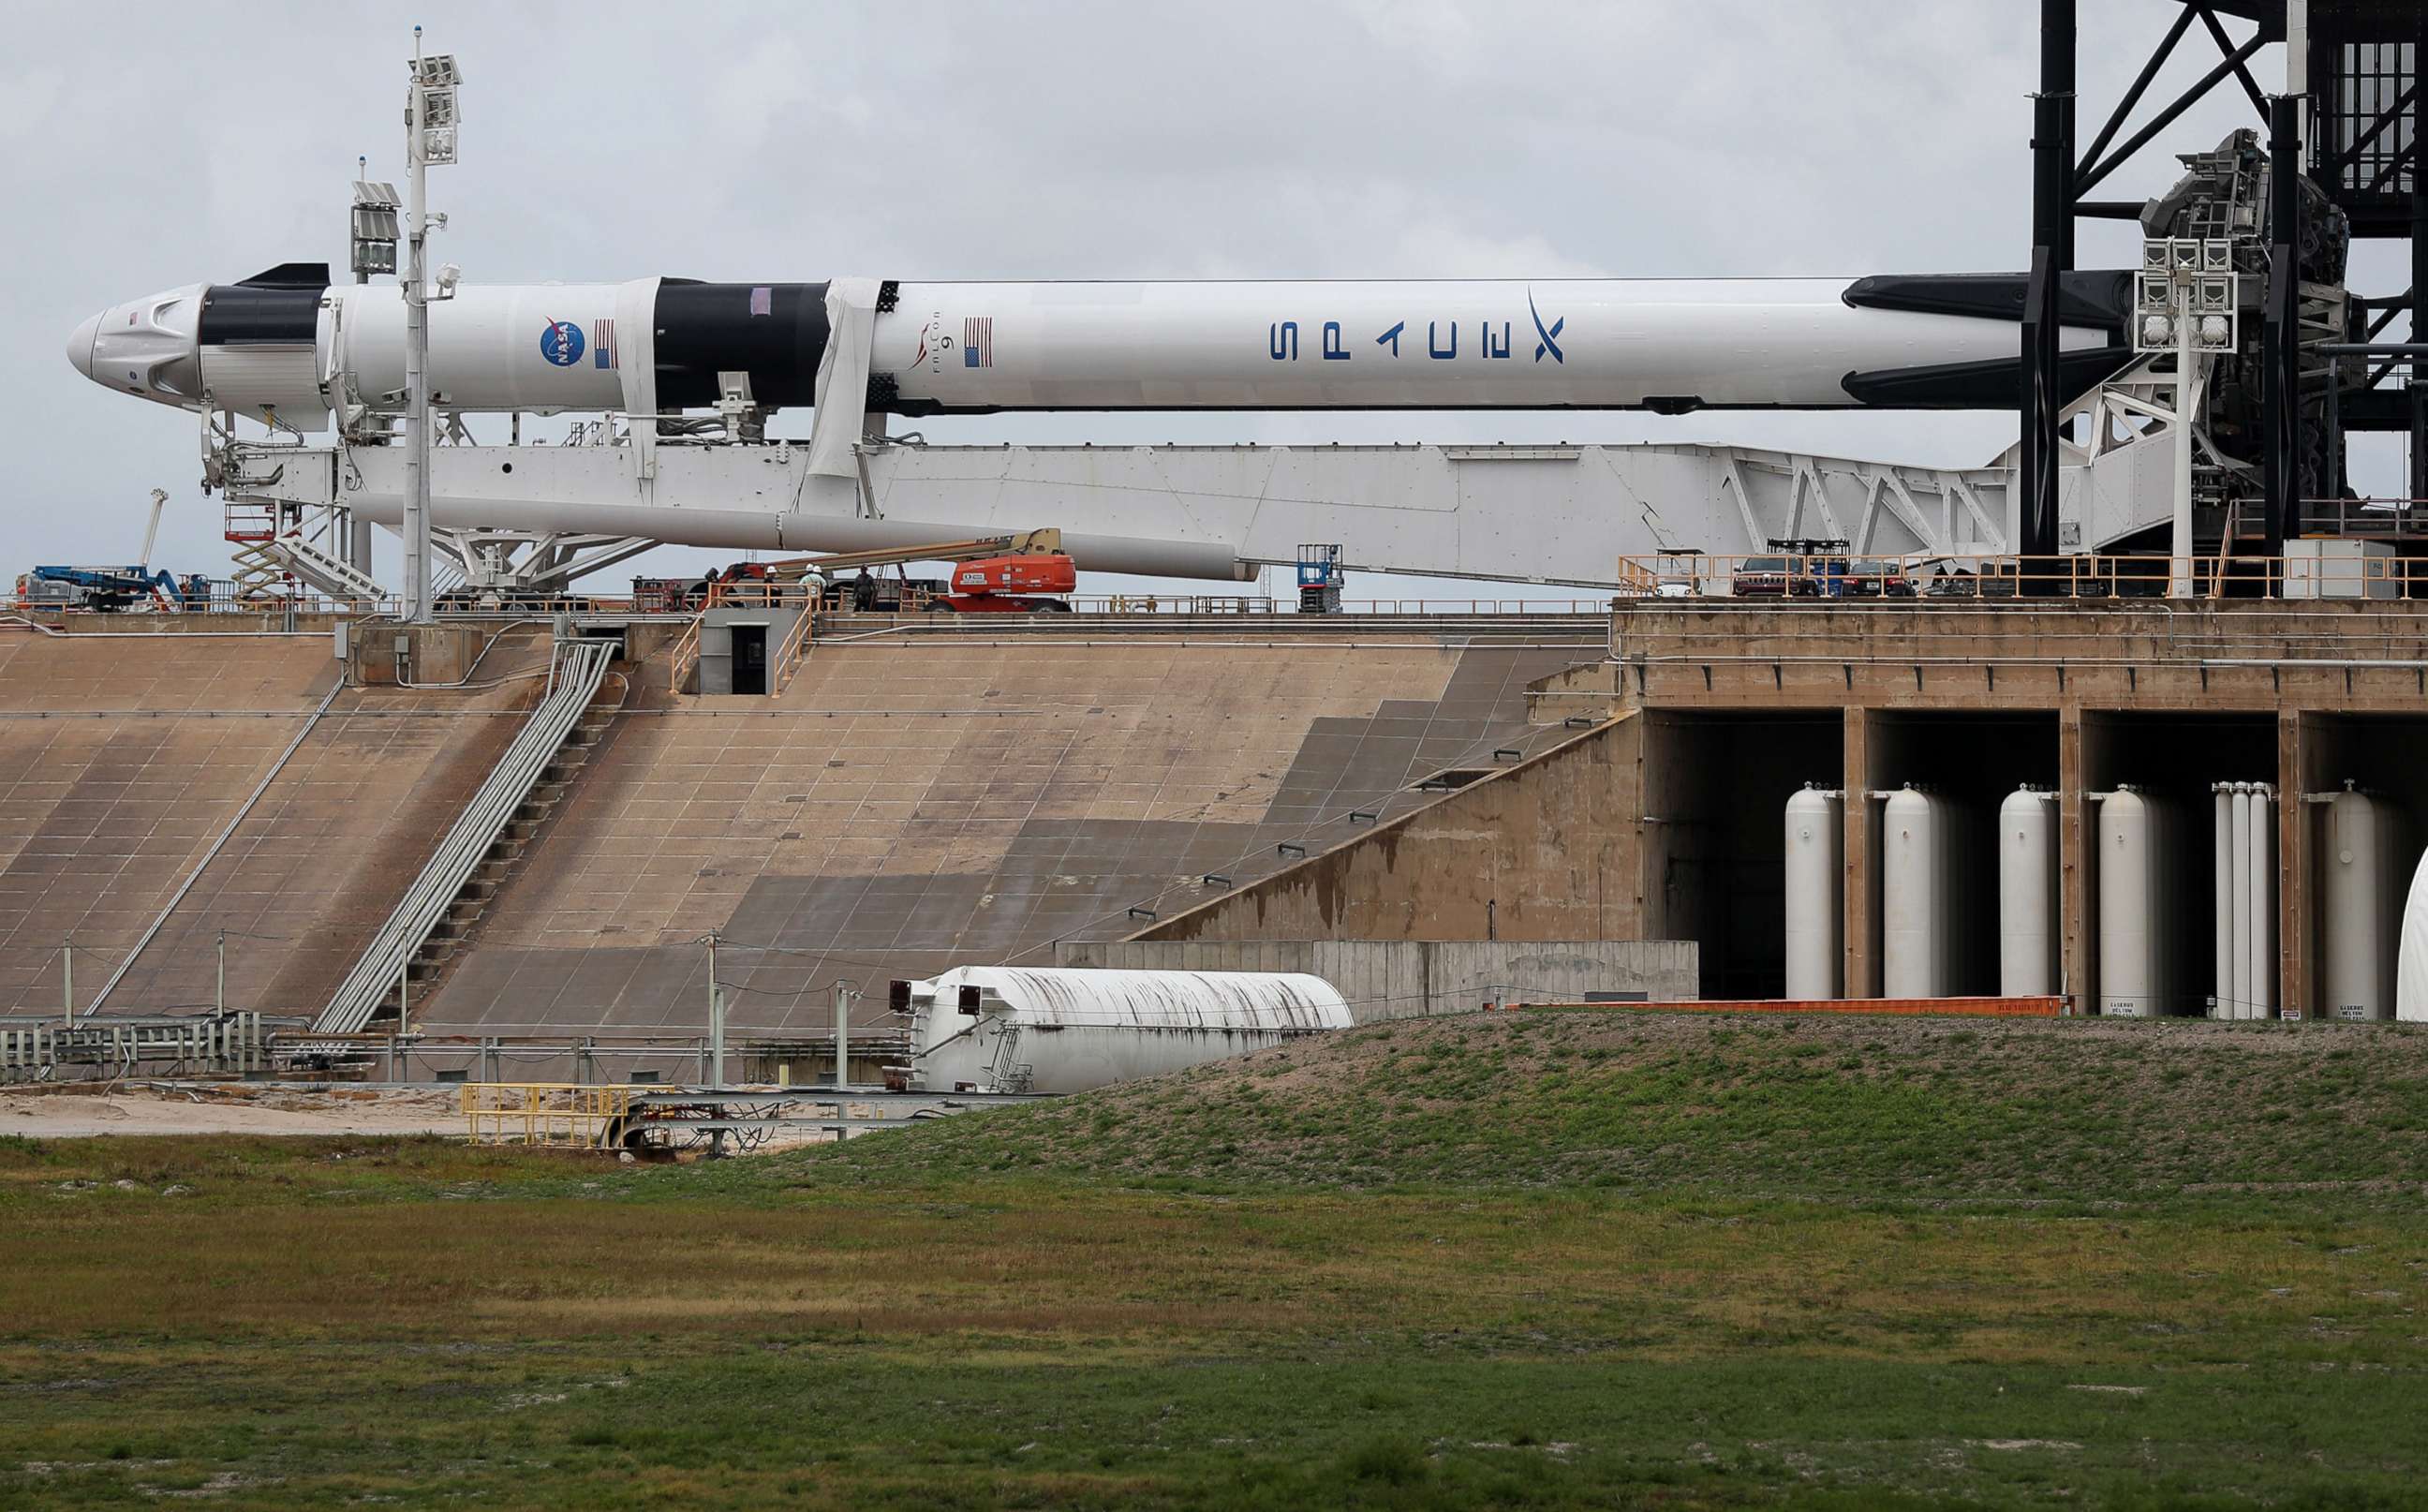 PHOTO: The SpaceX Falcon 9, with Dragon crew capsule is serviced on Launch Pad 39-A May 26, 2020, at the Kennedy Space Center in Cape Canaveral, Fla.